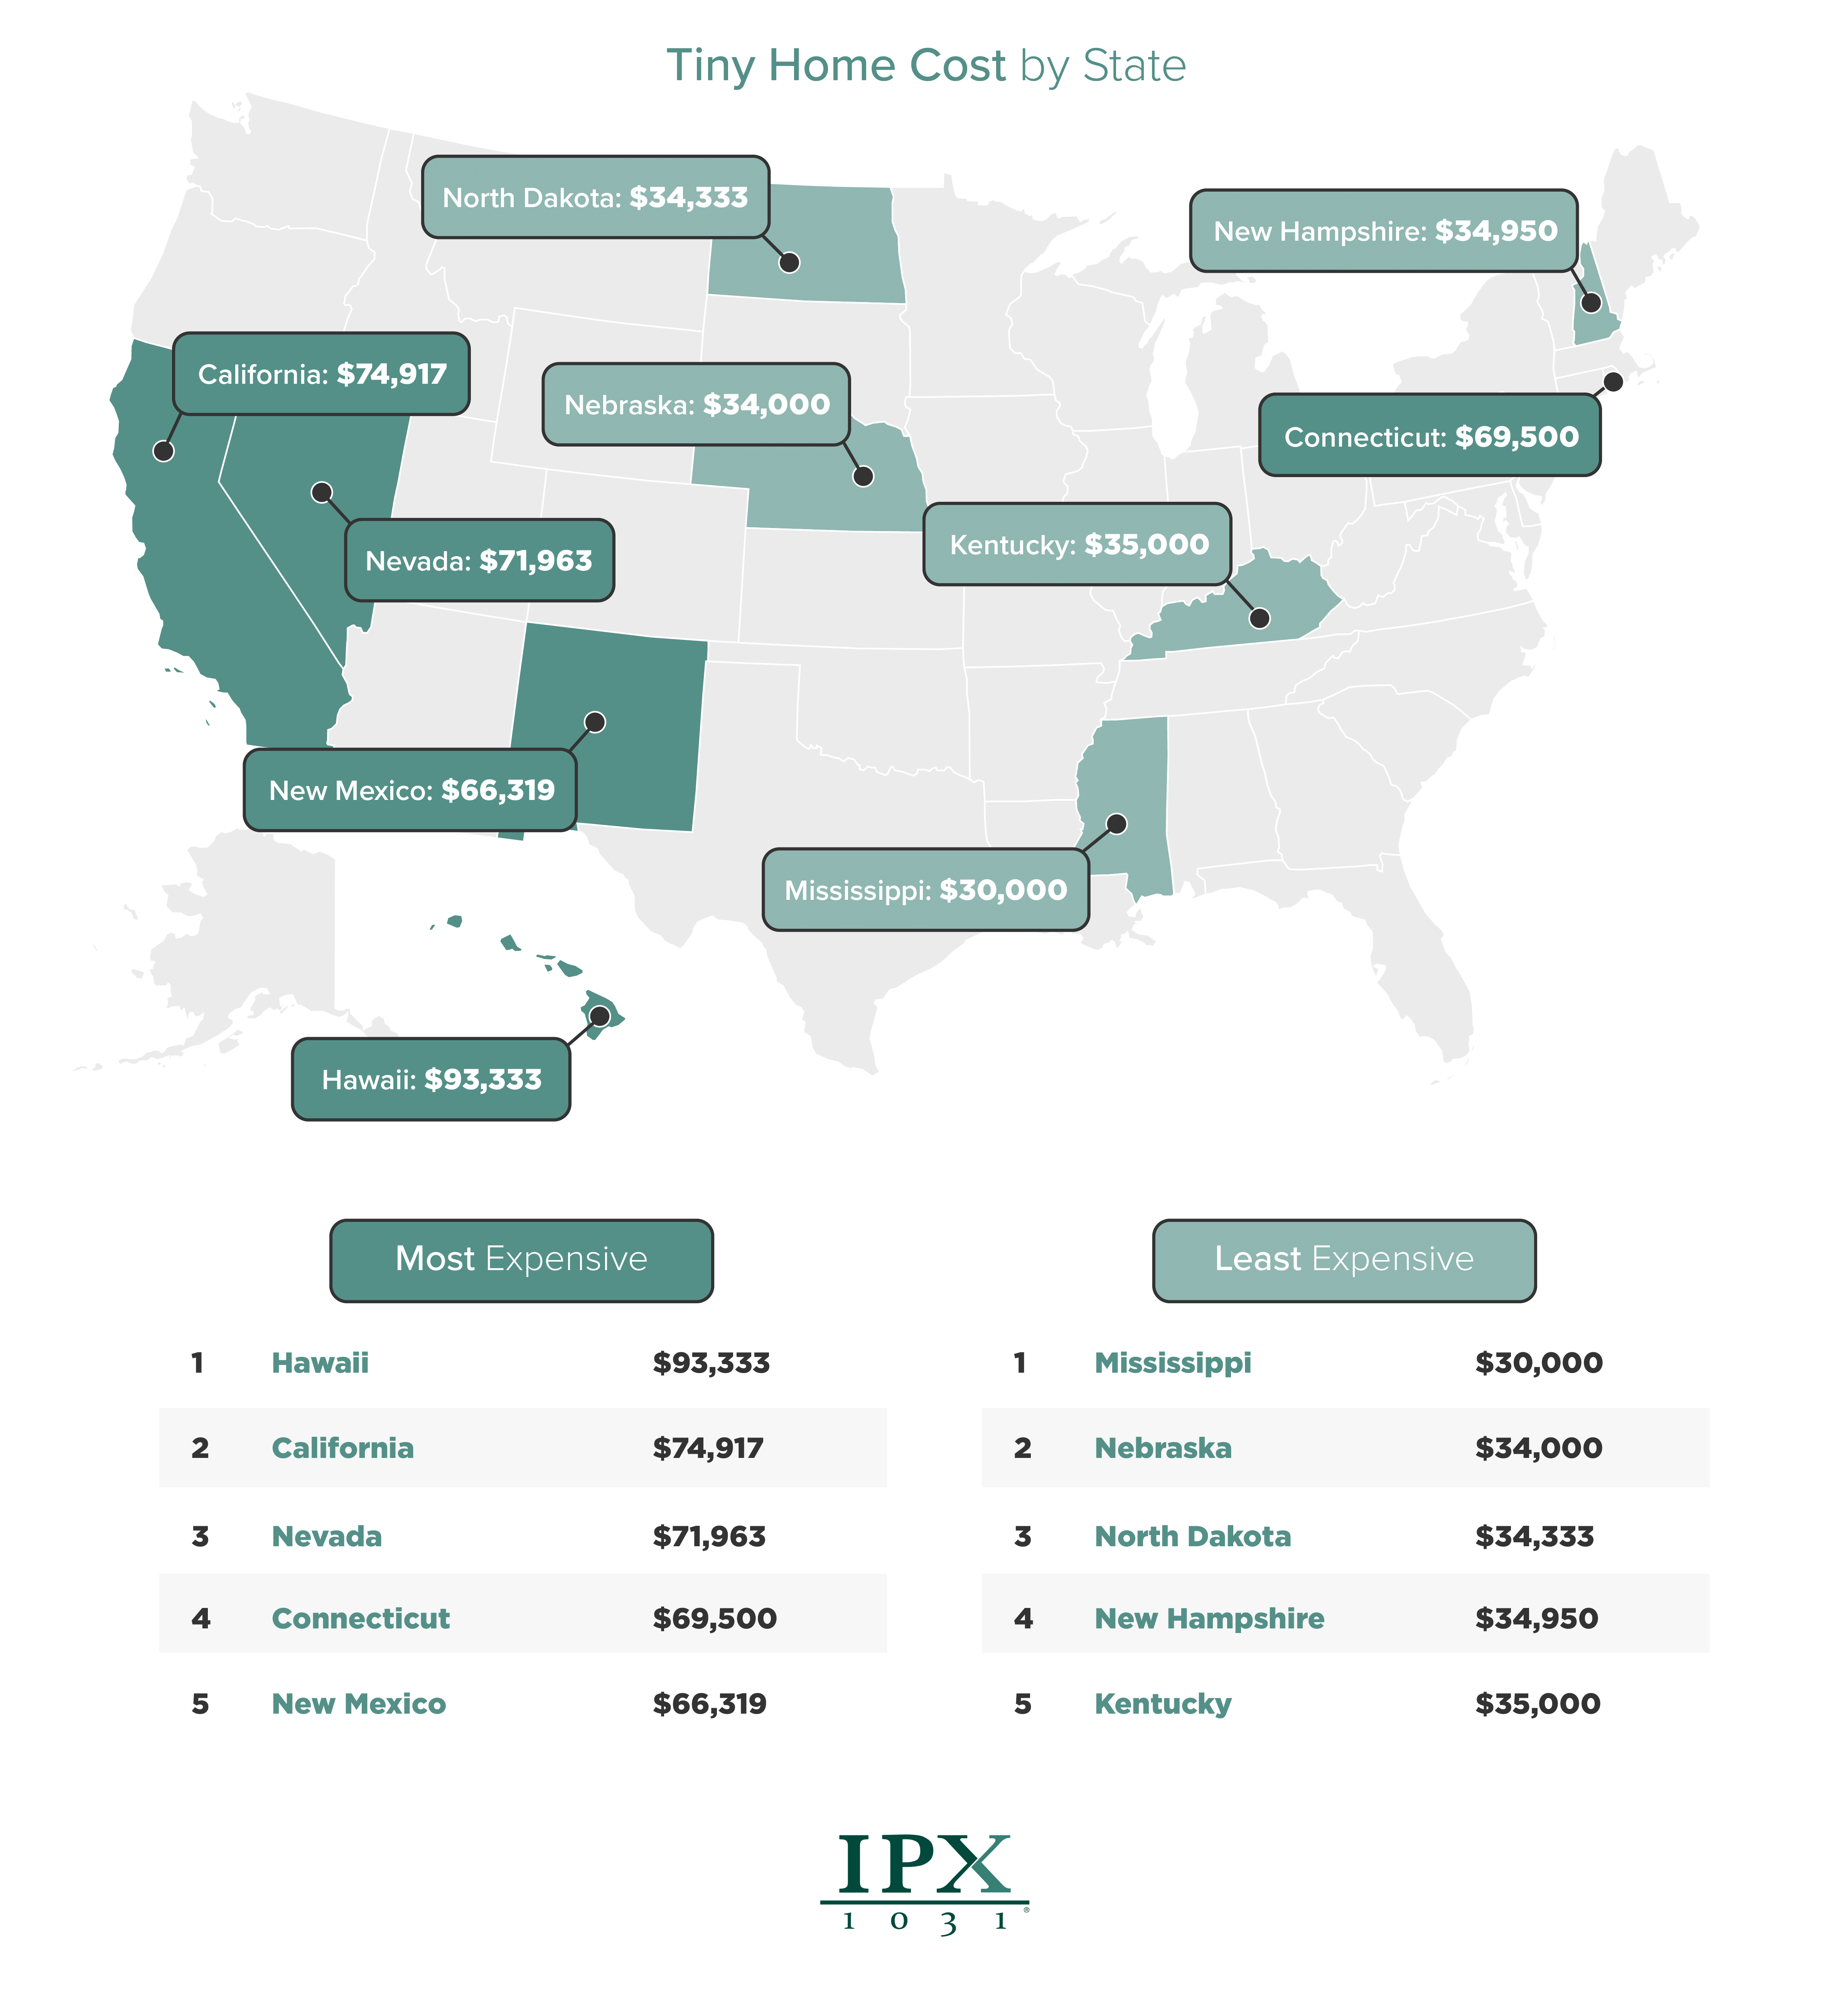 Tiny Home Cost by State